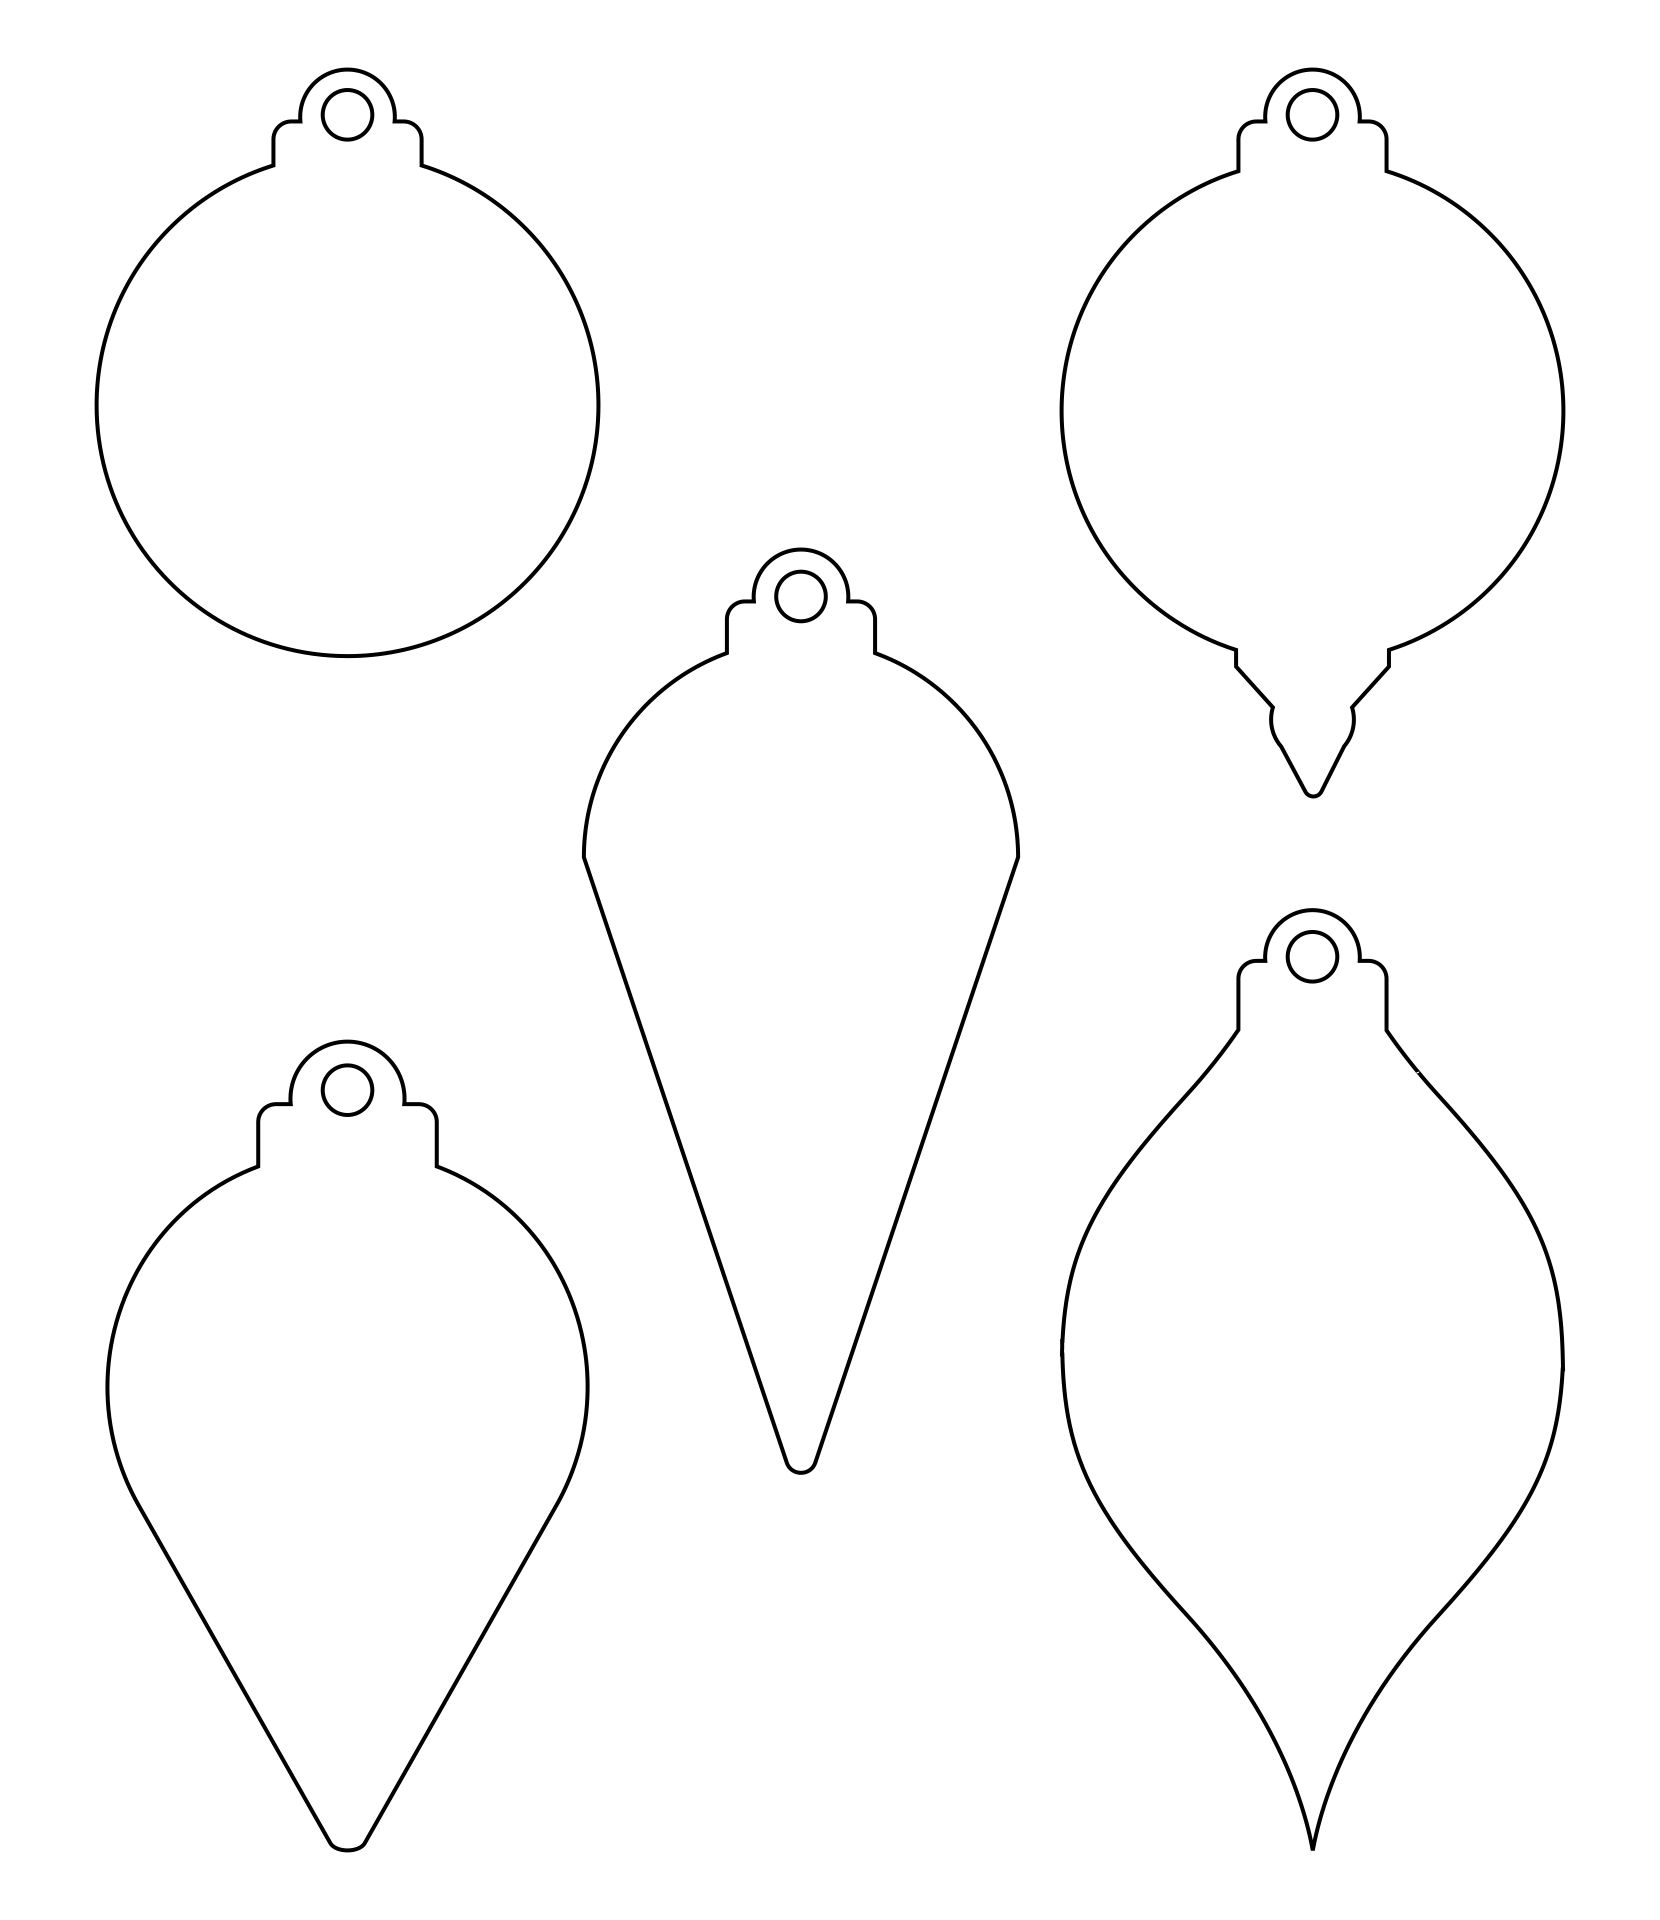 15 Best Printable Christmas Ornaments PDF for Free at Printablee